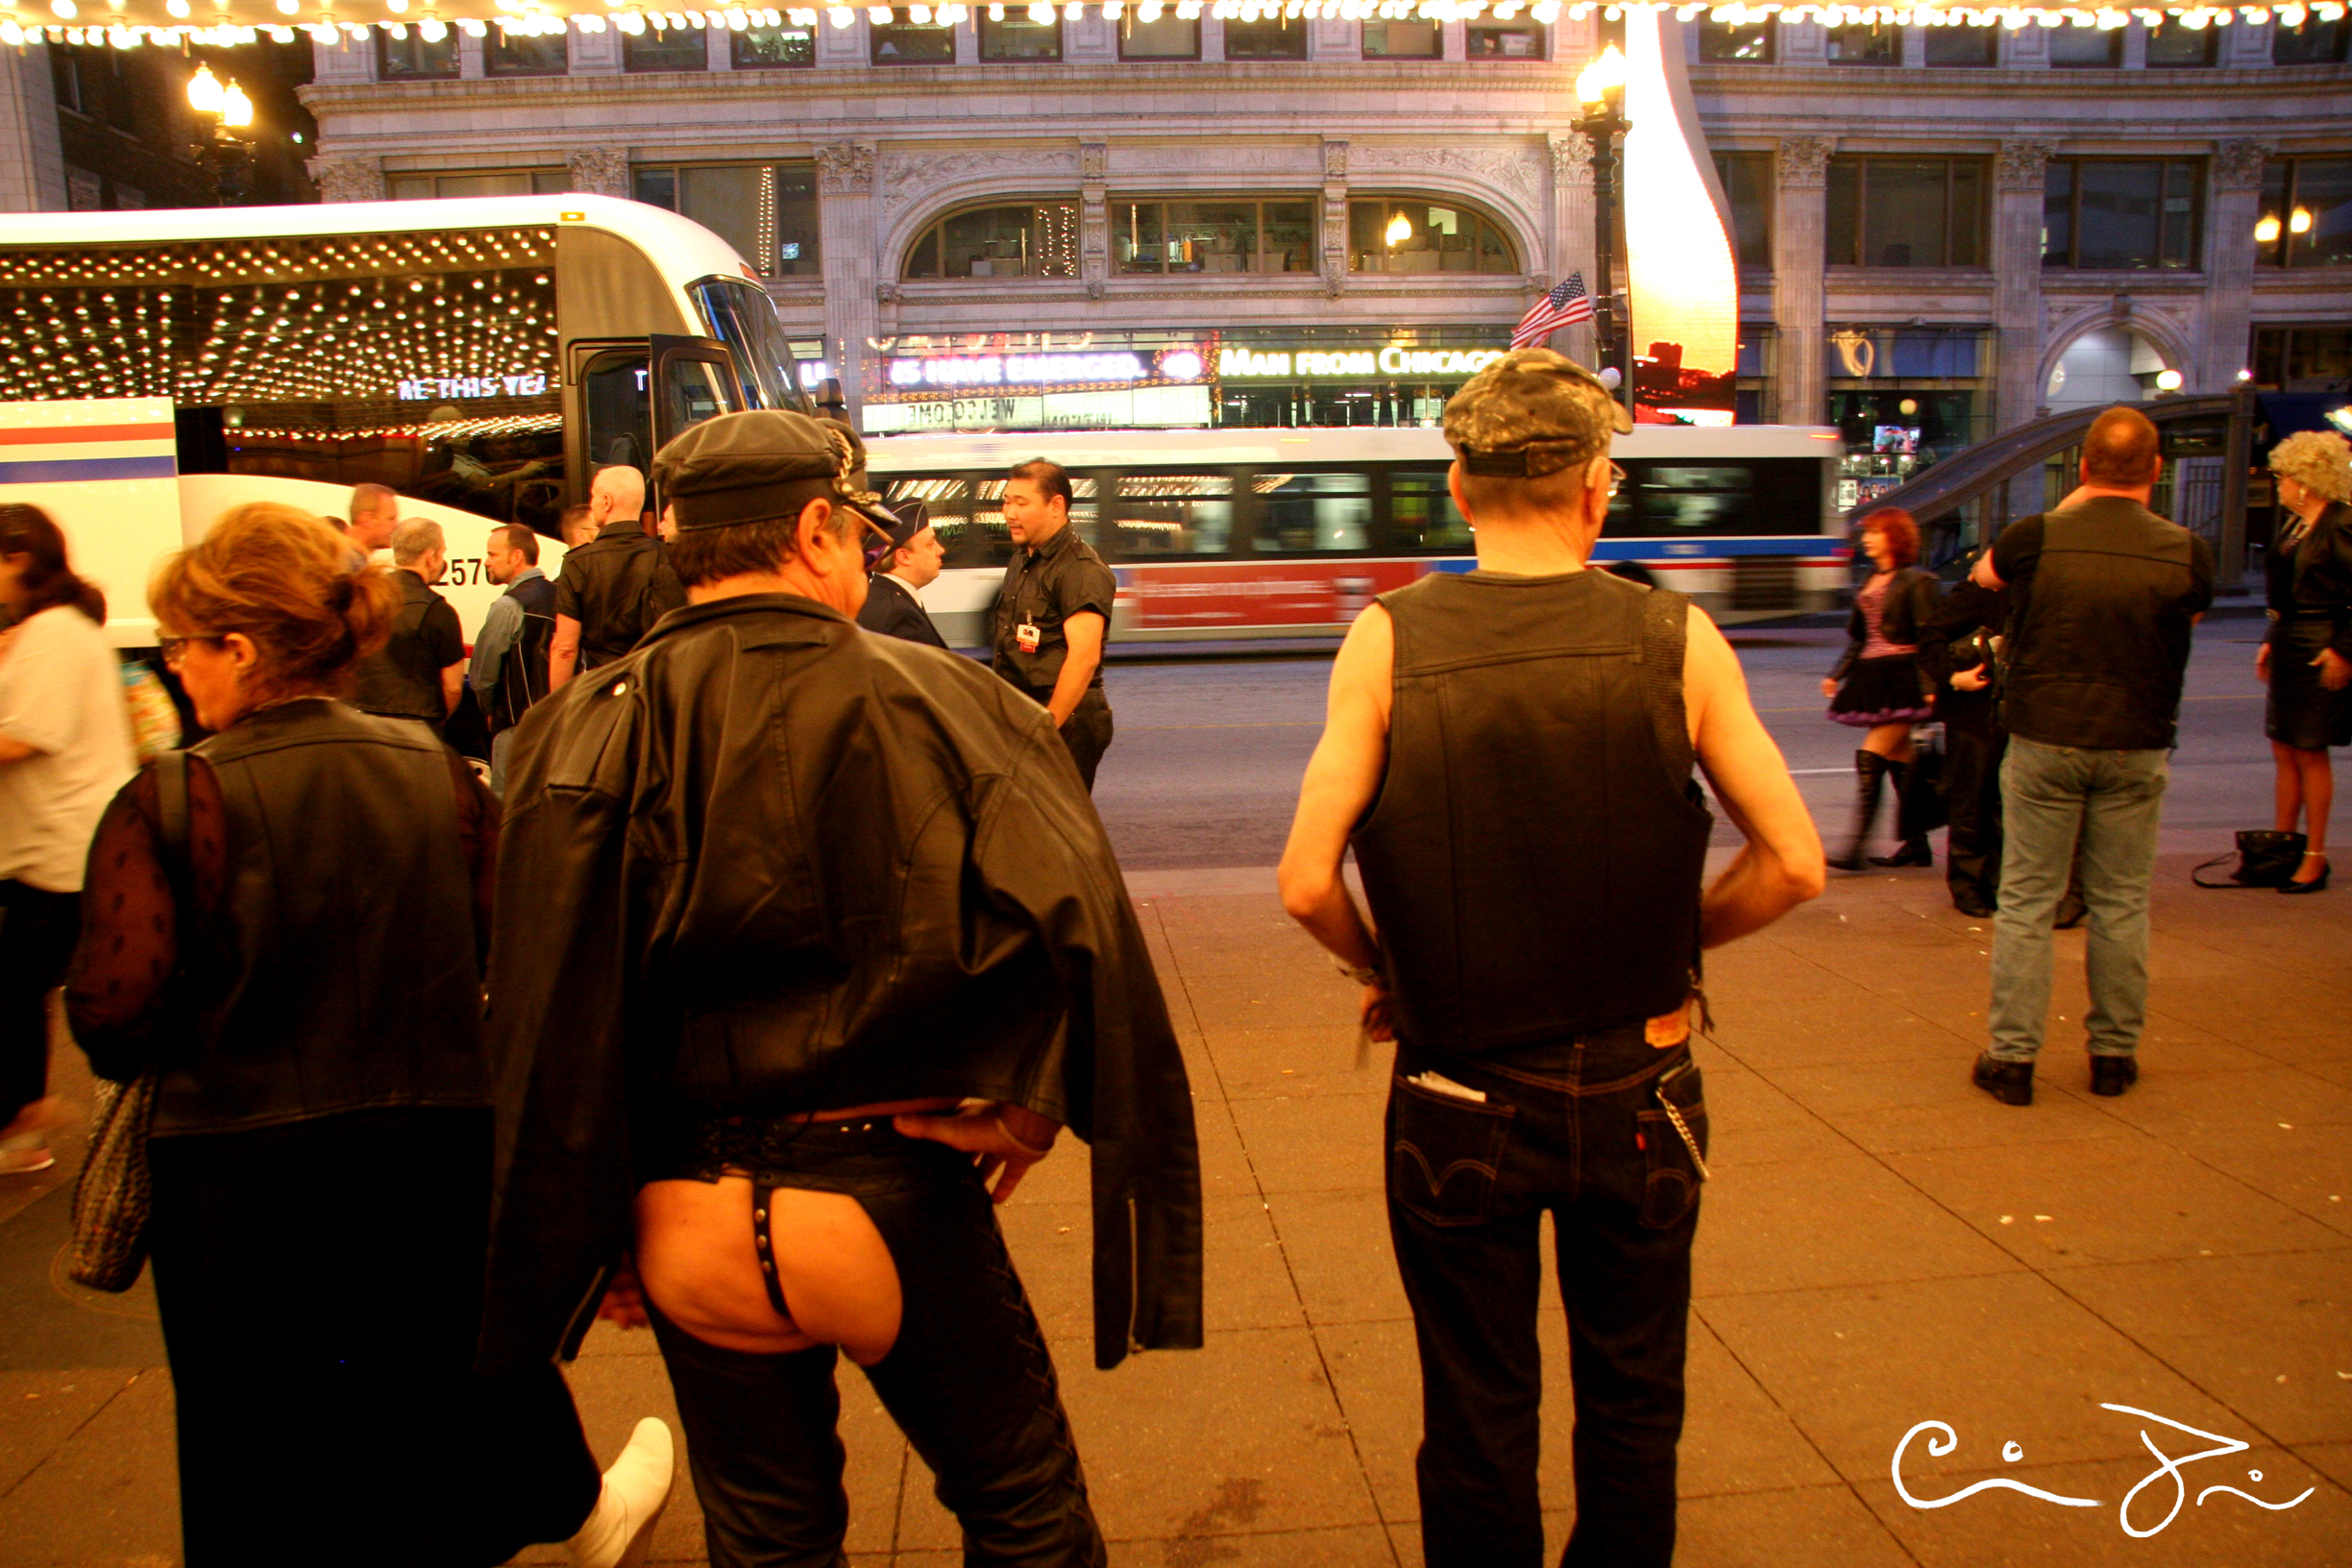 A representation of trans joy via International Mr Leather #29, at the Chicago Theater, 2007. The photo shows men wearing various assortments of leather, one has his butt cheeks on display in assless chaps.